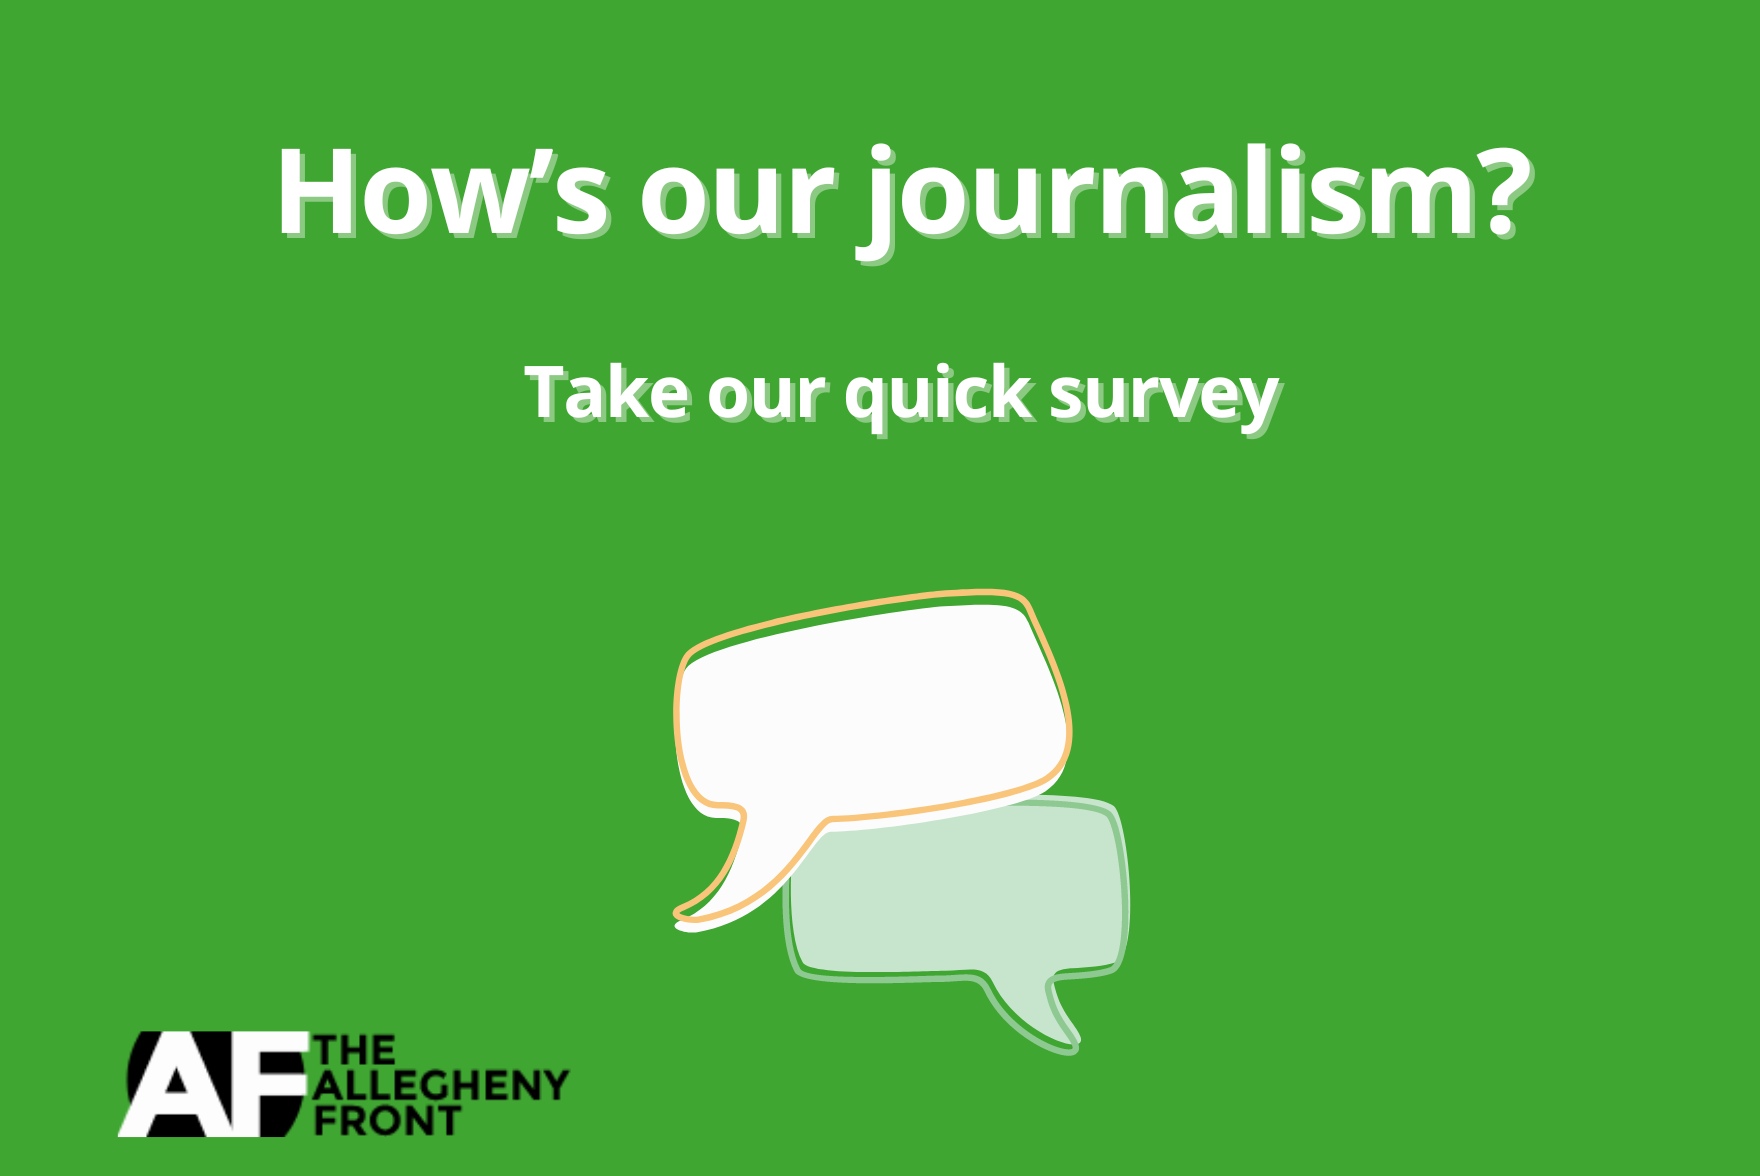 "How's our journalism? Take our quick survey